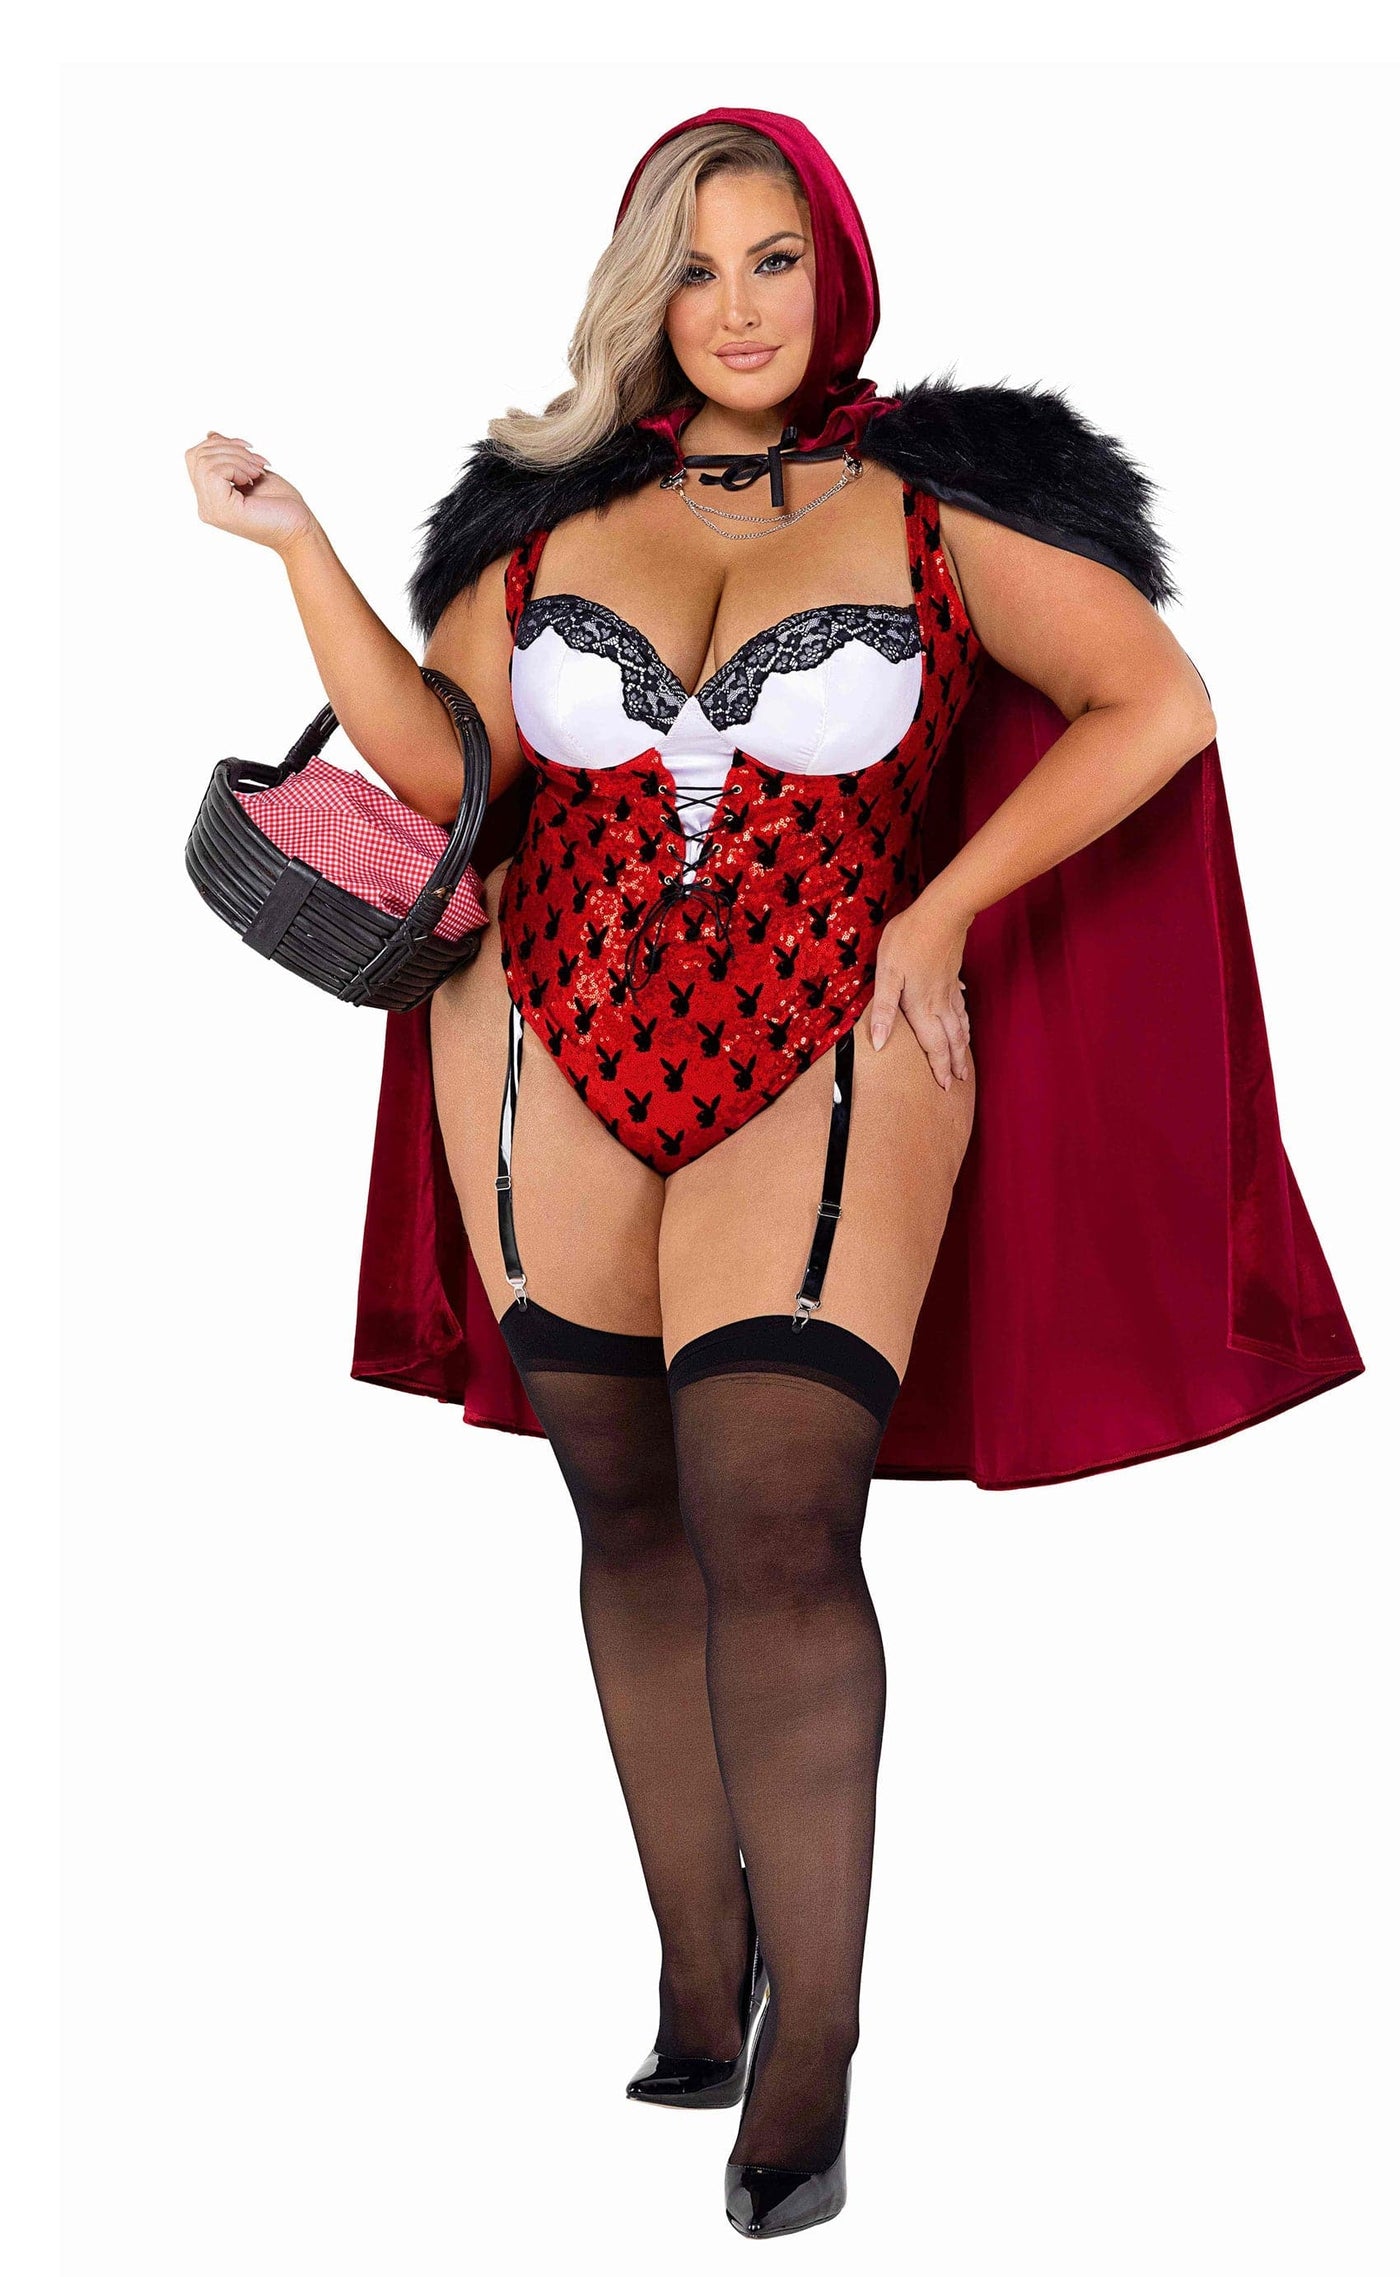 2pc. Official Playboy Bunny Enchanted Forest Women's Costume - For Love of Lingerie